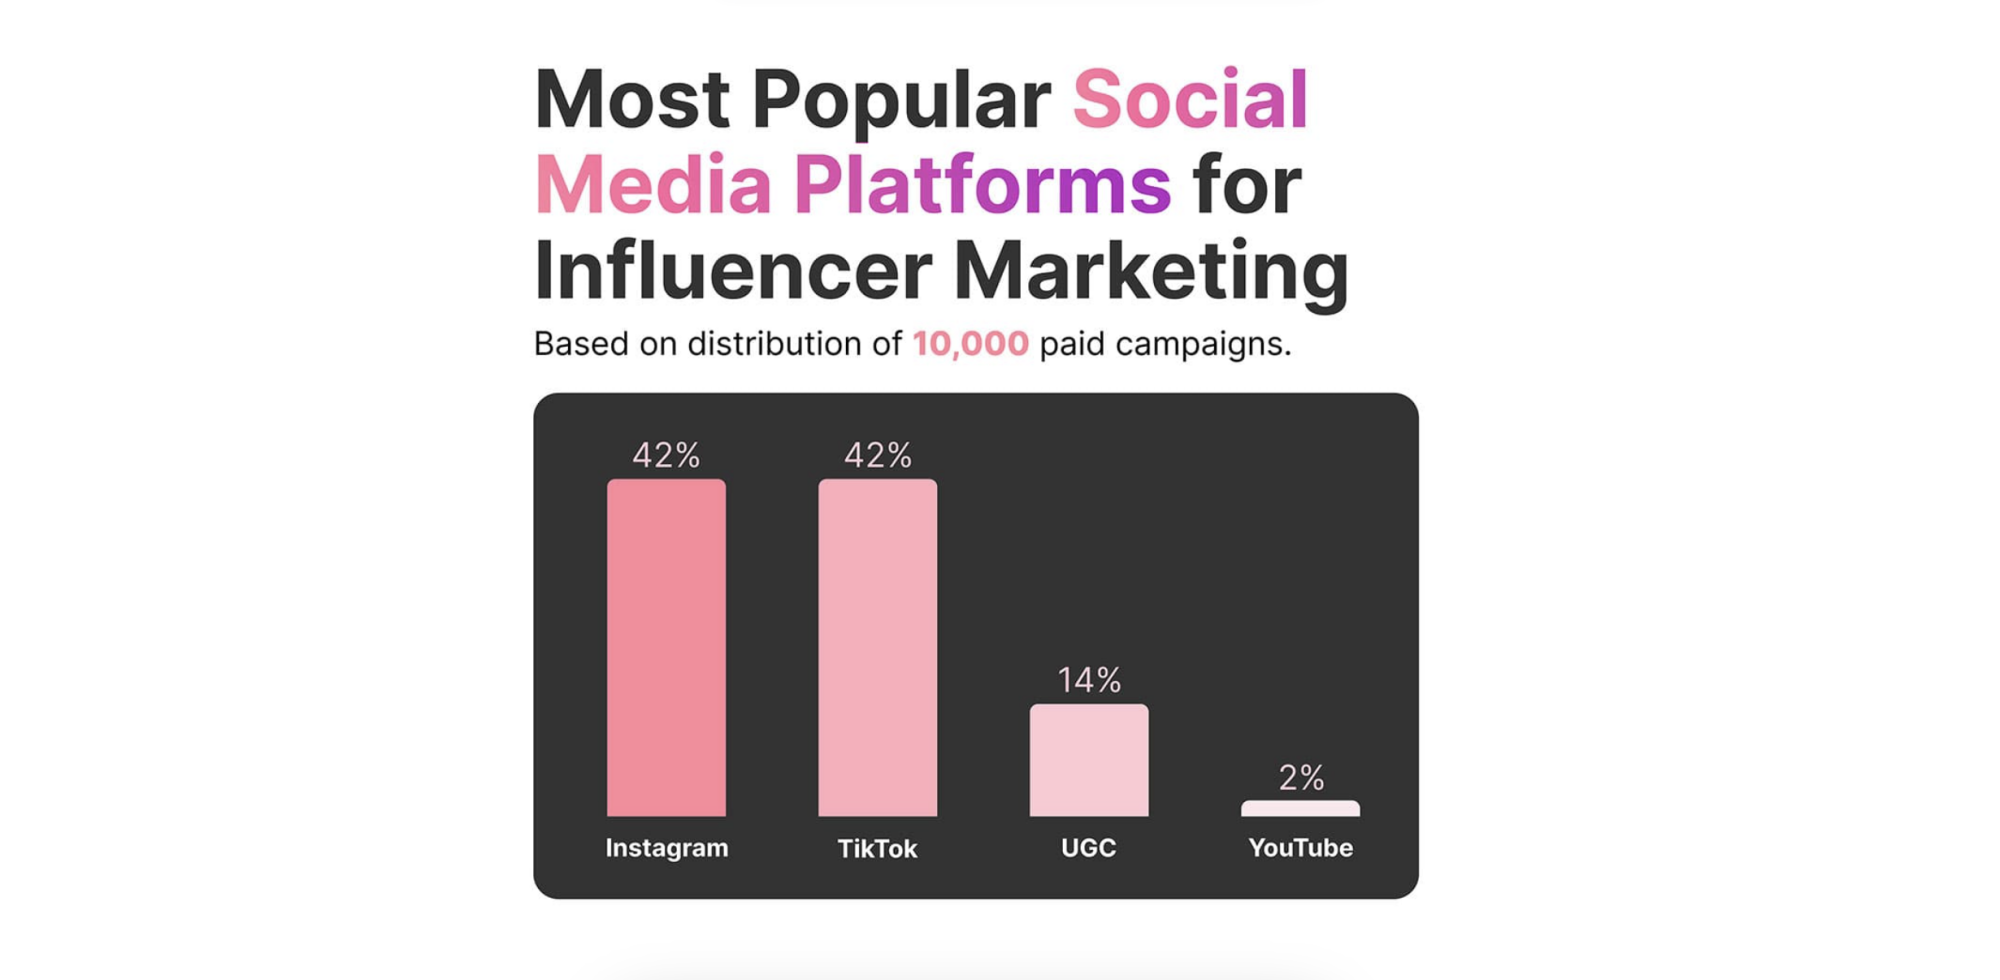 Graph showing the most popular social media platforms for influencer marketing. TikTok and Instagram are tied at 42 percent each.